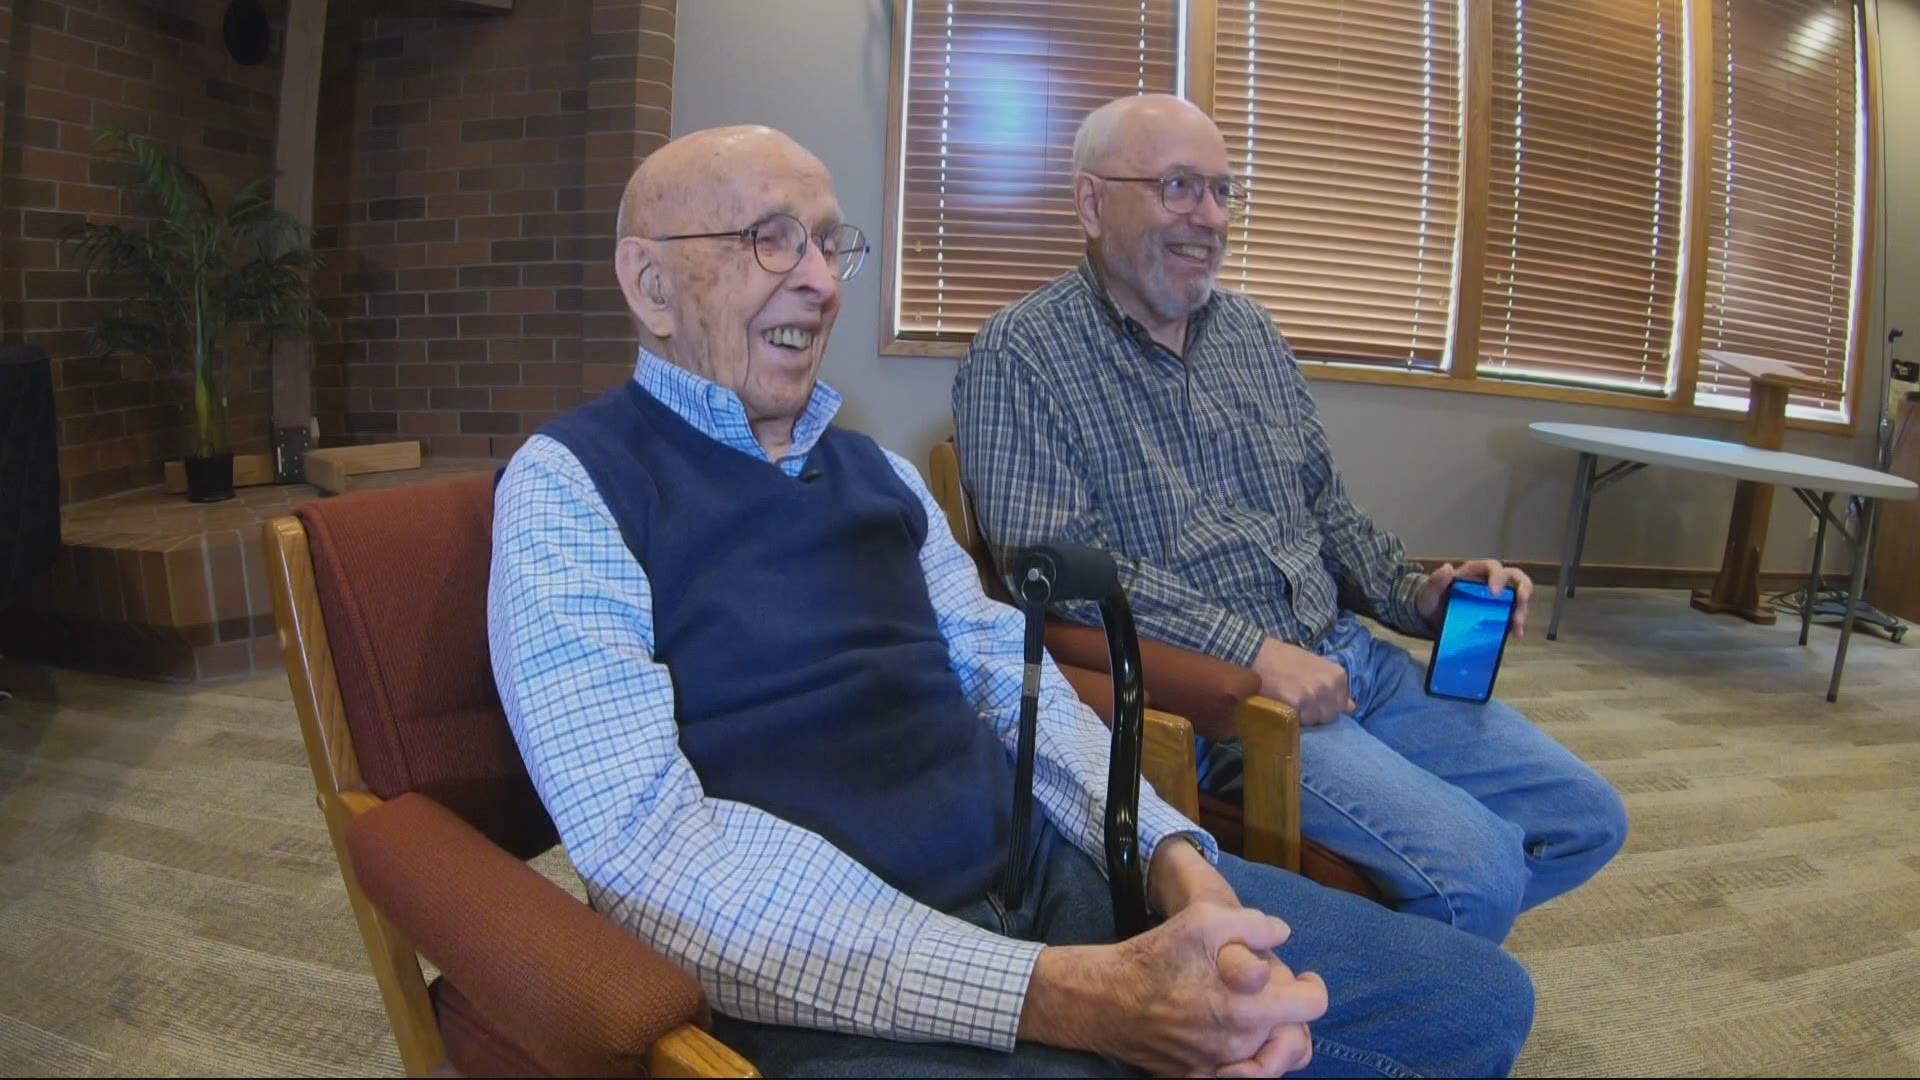 At the age of 106, a man in Salmon Creek, Washington has managed to stay healthy during the pandemic. He shared his advice for longevity with KGW's Jon Goodwin